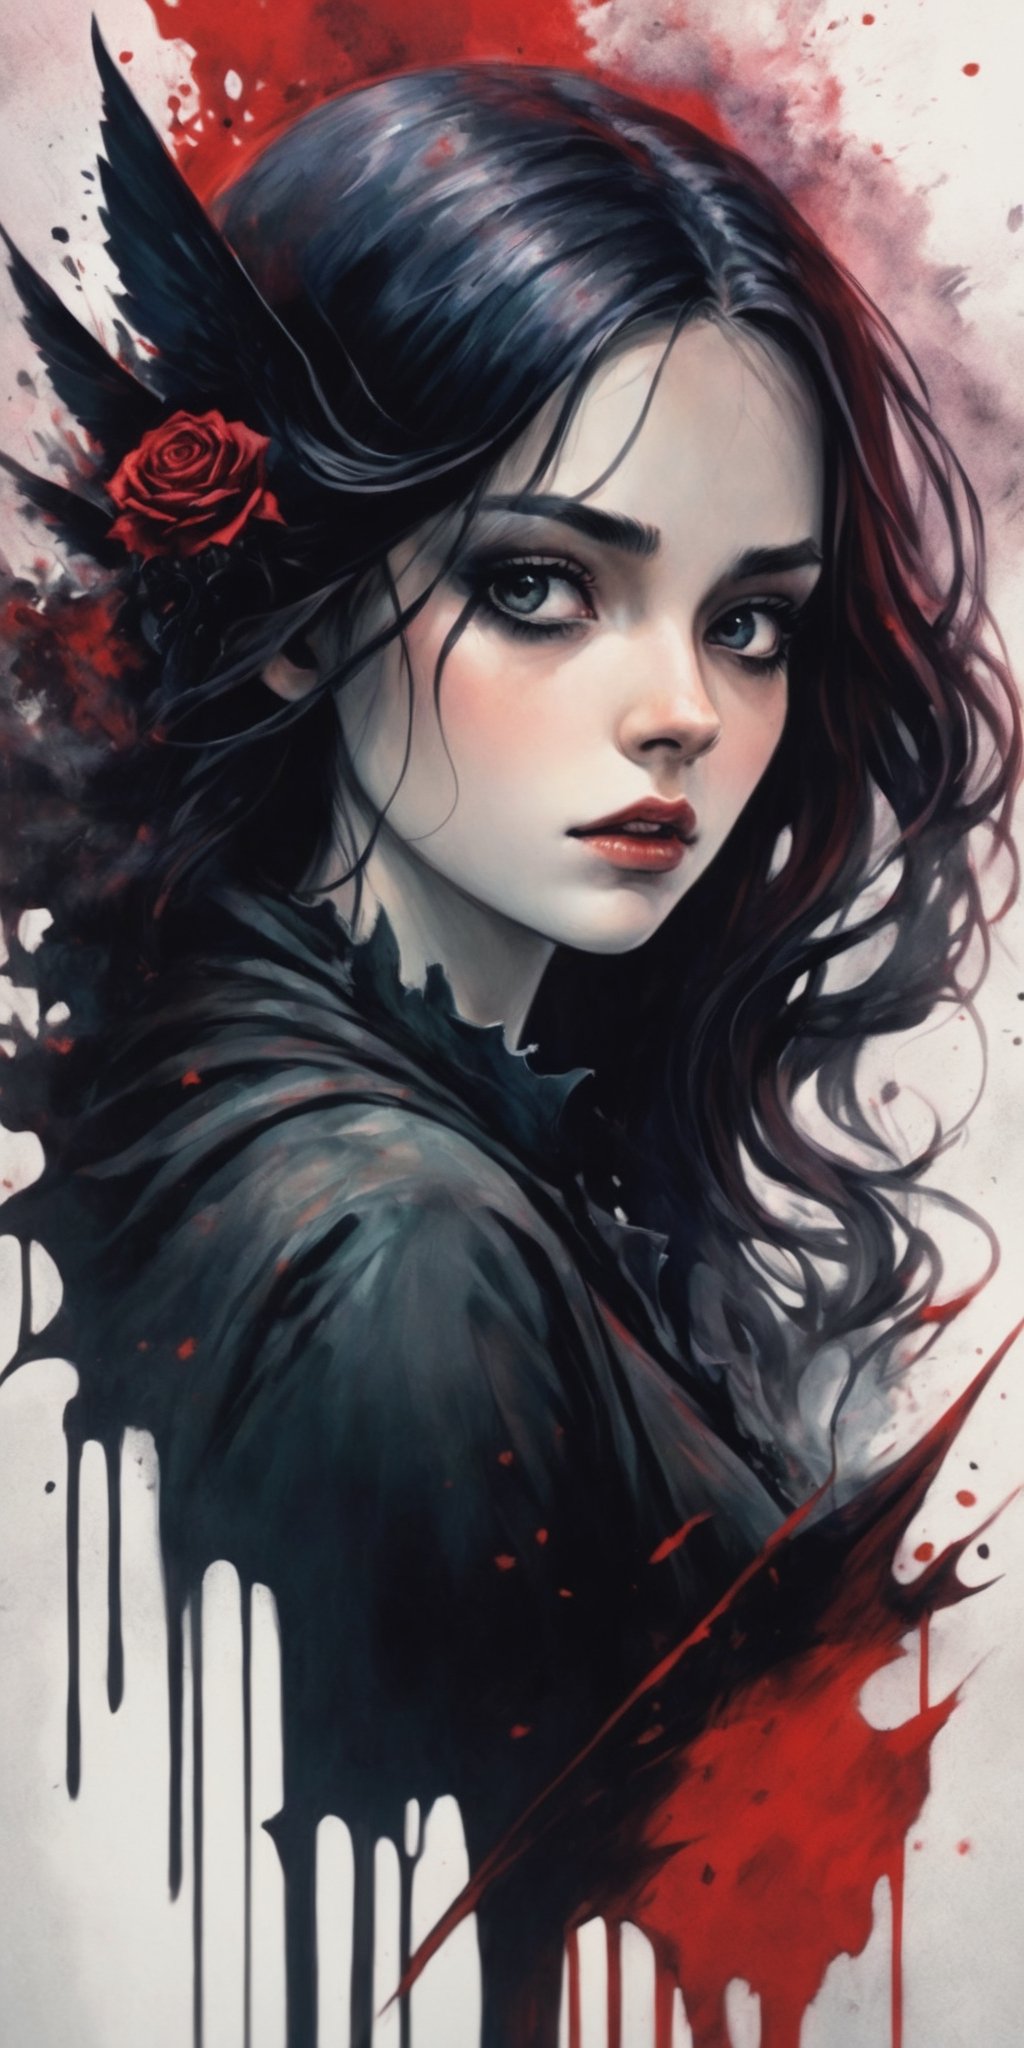 masterpiece, high_res, high quality, splash art style, watercolors, 
create the personification of all phobias in the face of a beautiful young woman. The setting should be dark and gothic, the heroine of the composition should be frightening despite her beauty. Use the experience of horror films and the style of the best artists in the gothic style. The palette should be dark and contrasting.
incredibly detailed, aesthetic, absurdes, creepy, horror, thriller,Leonardo Style